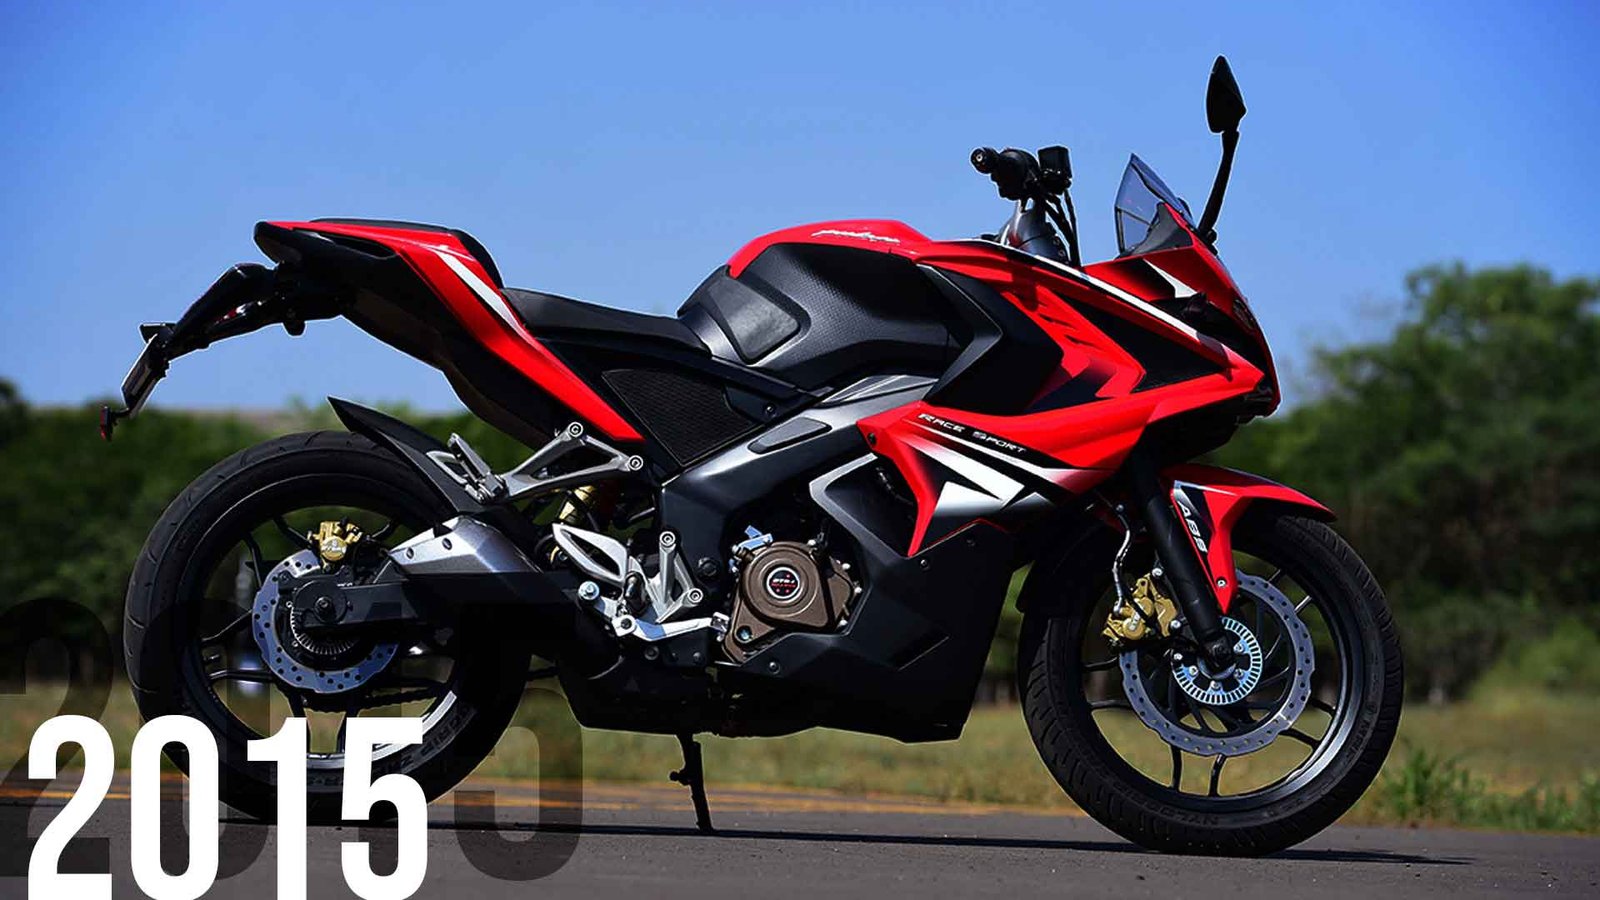 The Pulsar RS200, with it's superbike deisgn and performance, put India on the map with resepct to fast bikes.